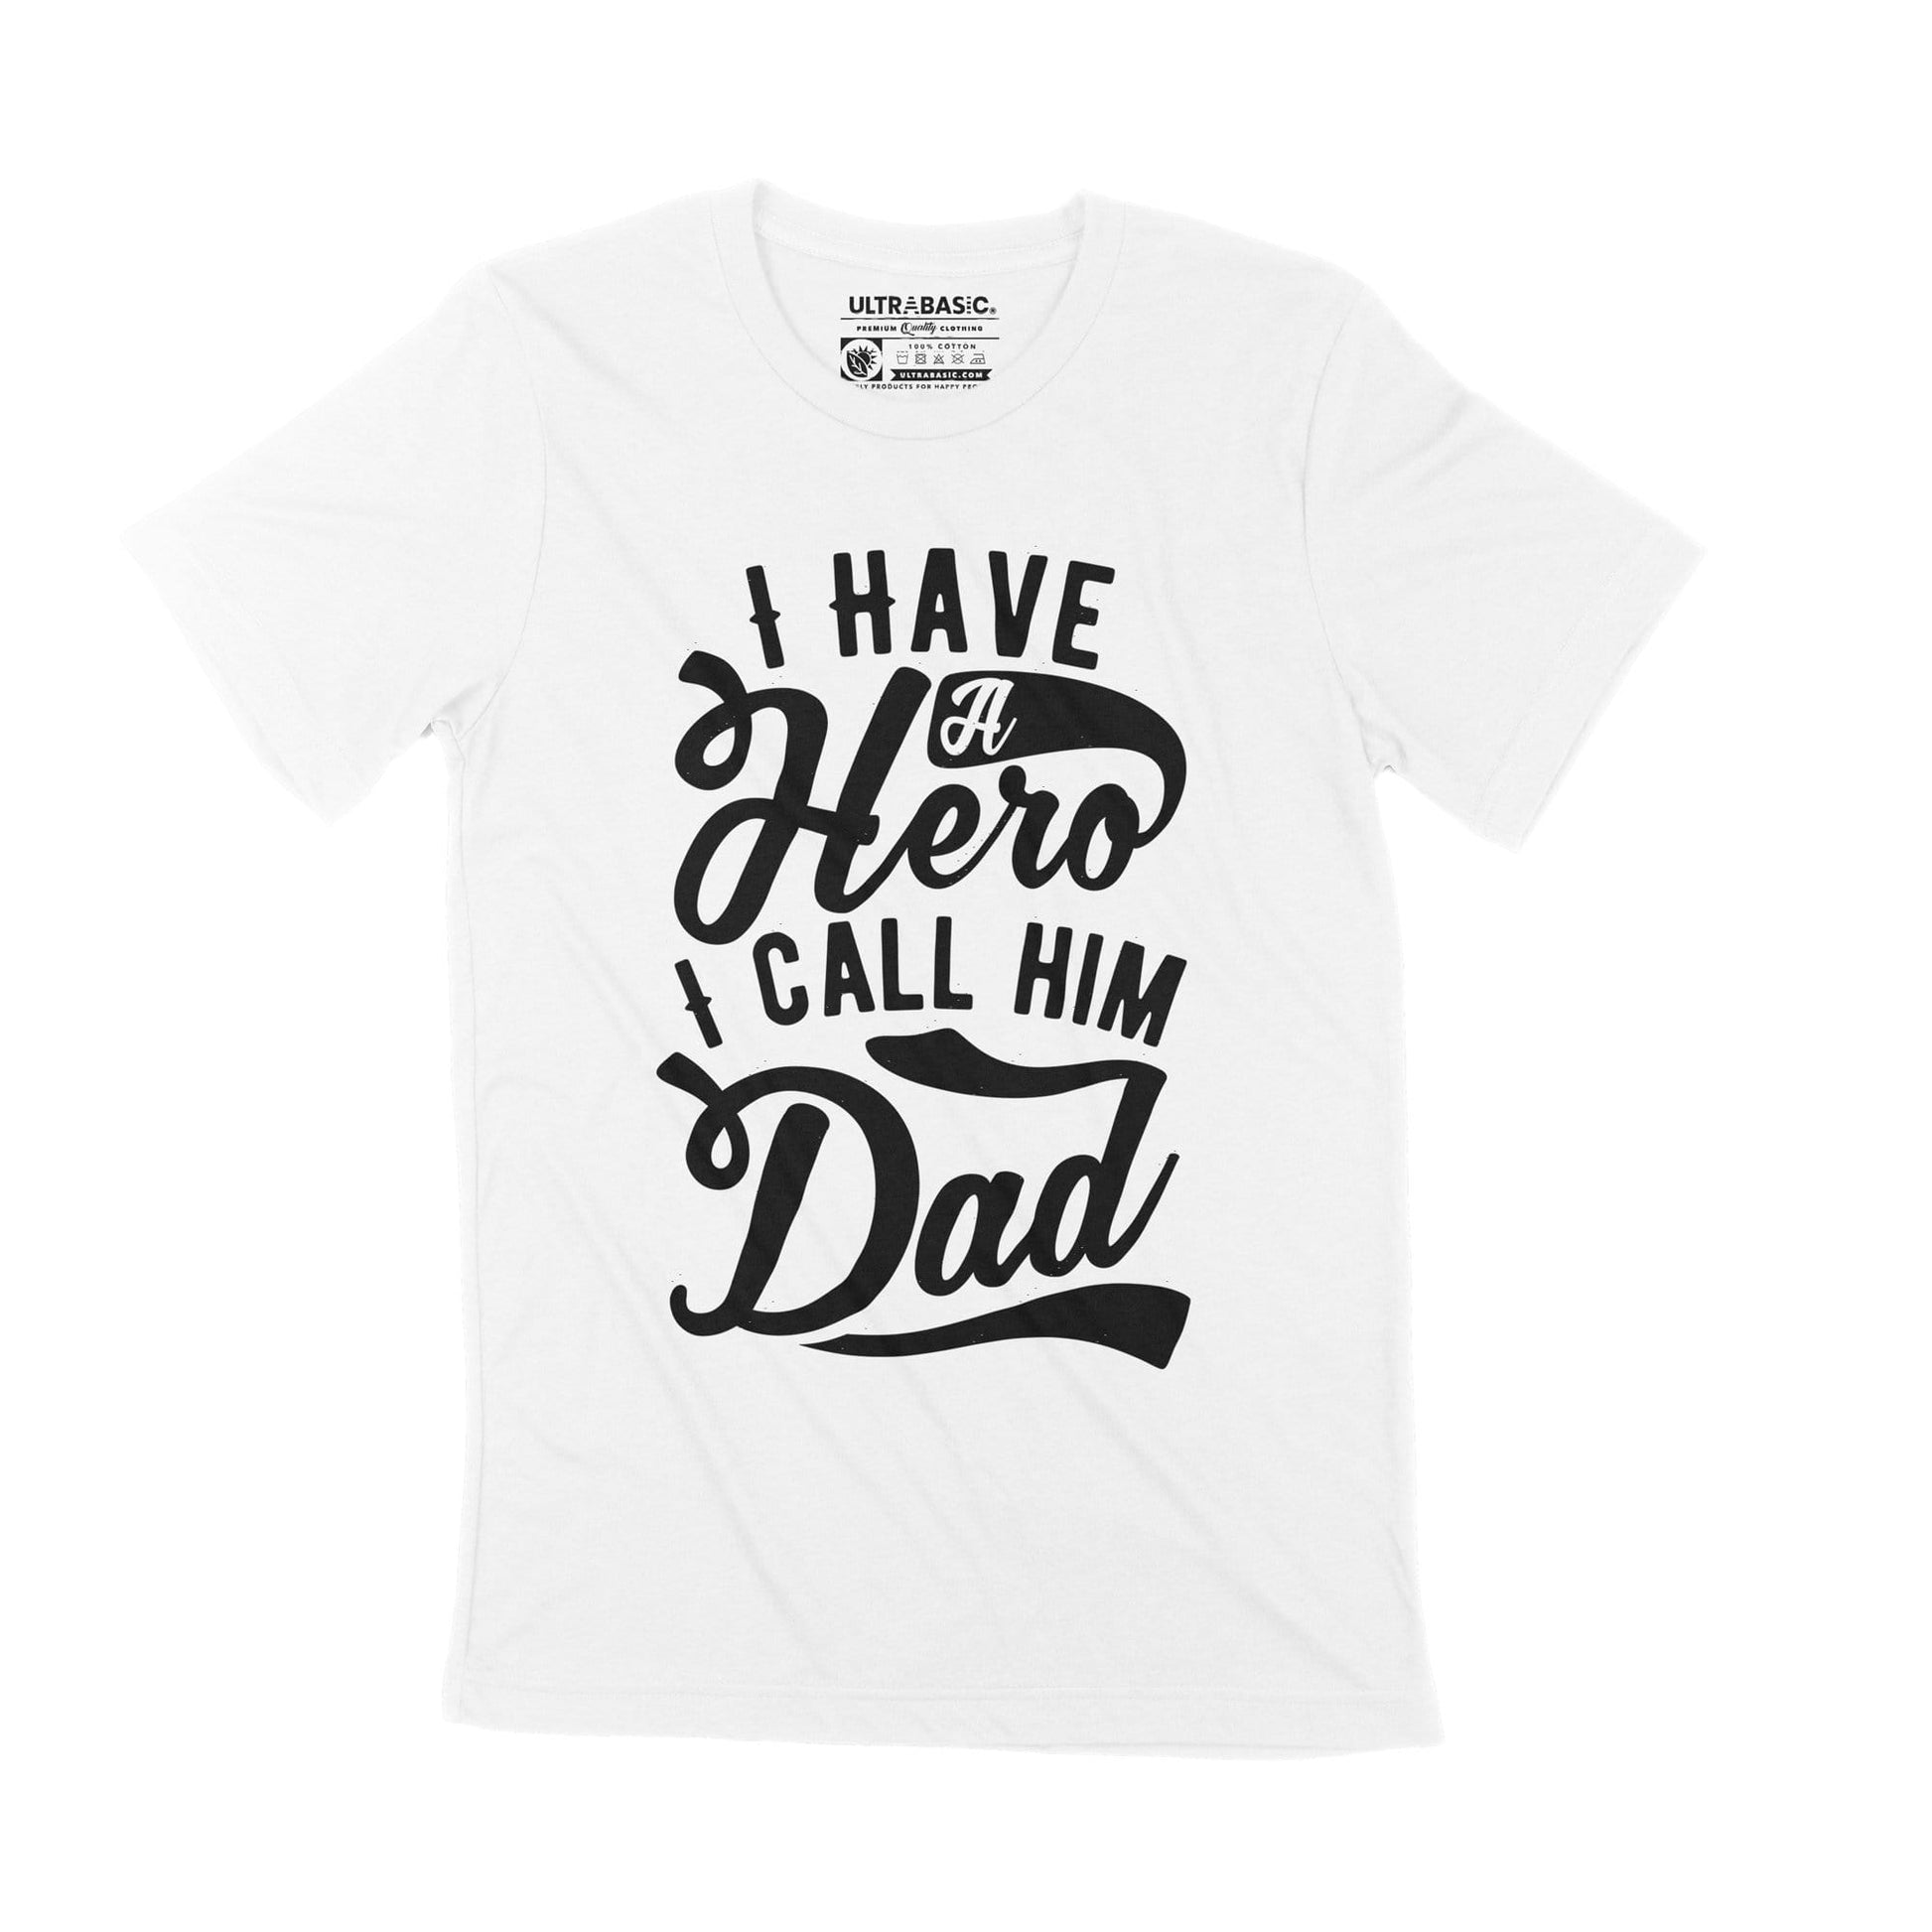 superman superhero daddy father thanksgiving not today tees inspirational peace love happiness adventure husband tshirt quote positive loved relax printed cotton womens youth t shirt life clothes apperal modern mens casual adult birthday gift tahirts